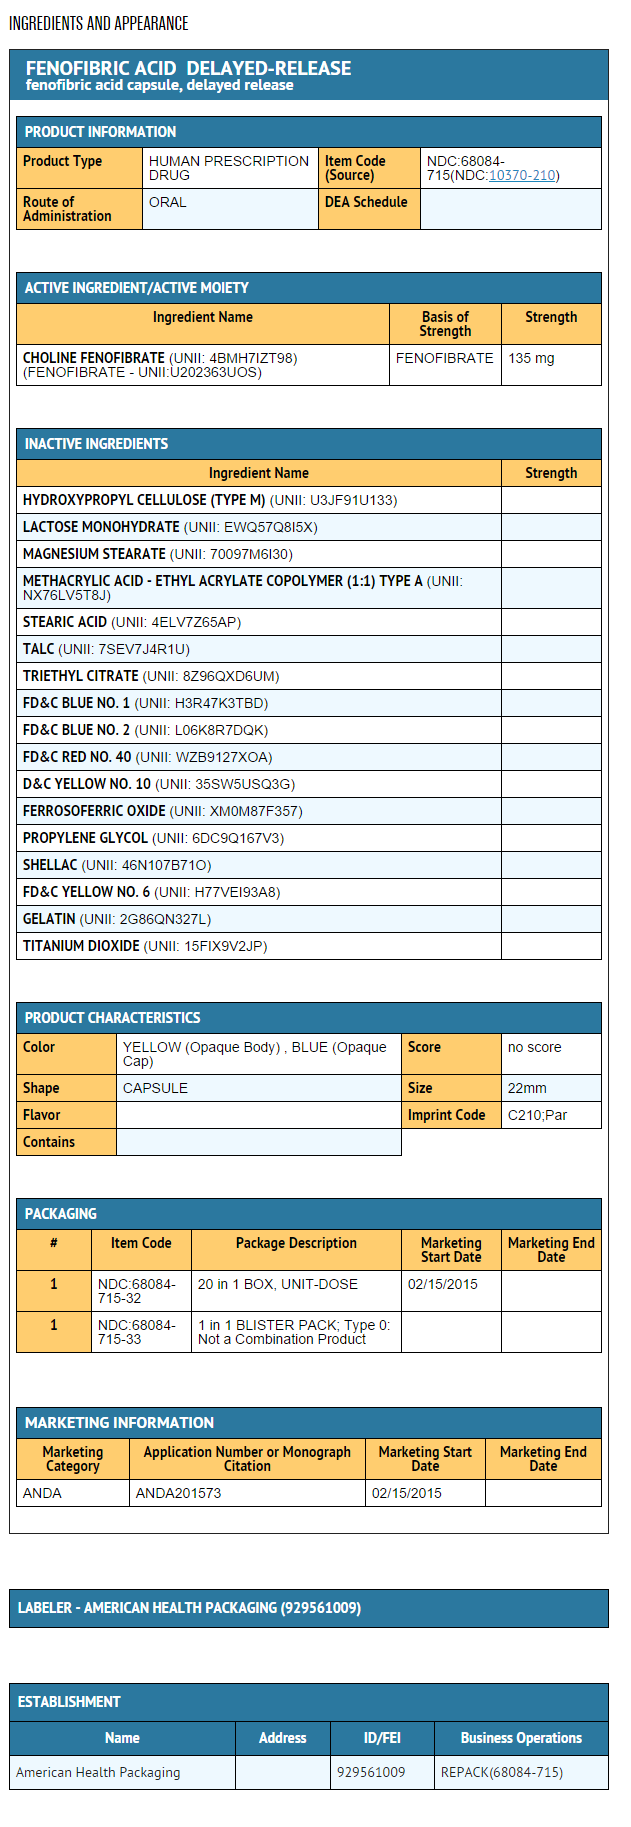 File:Fenofibric acid ingredients and appearance.png